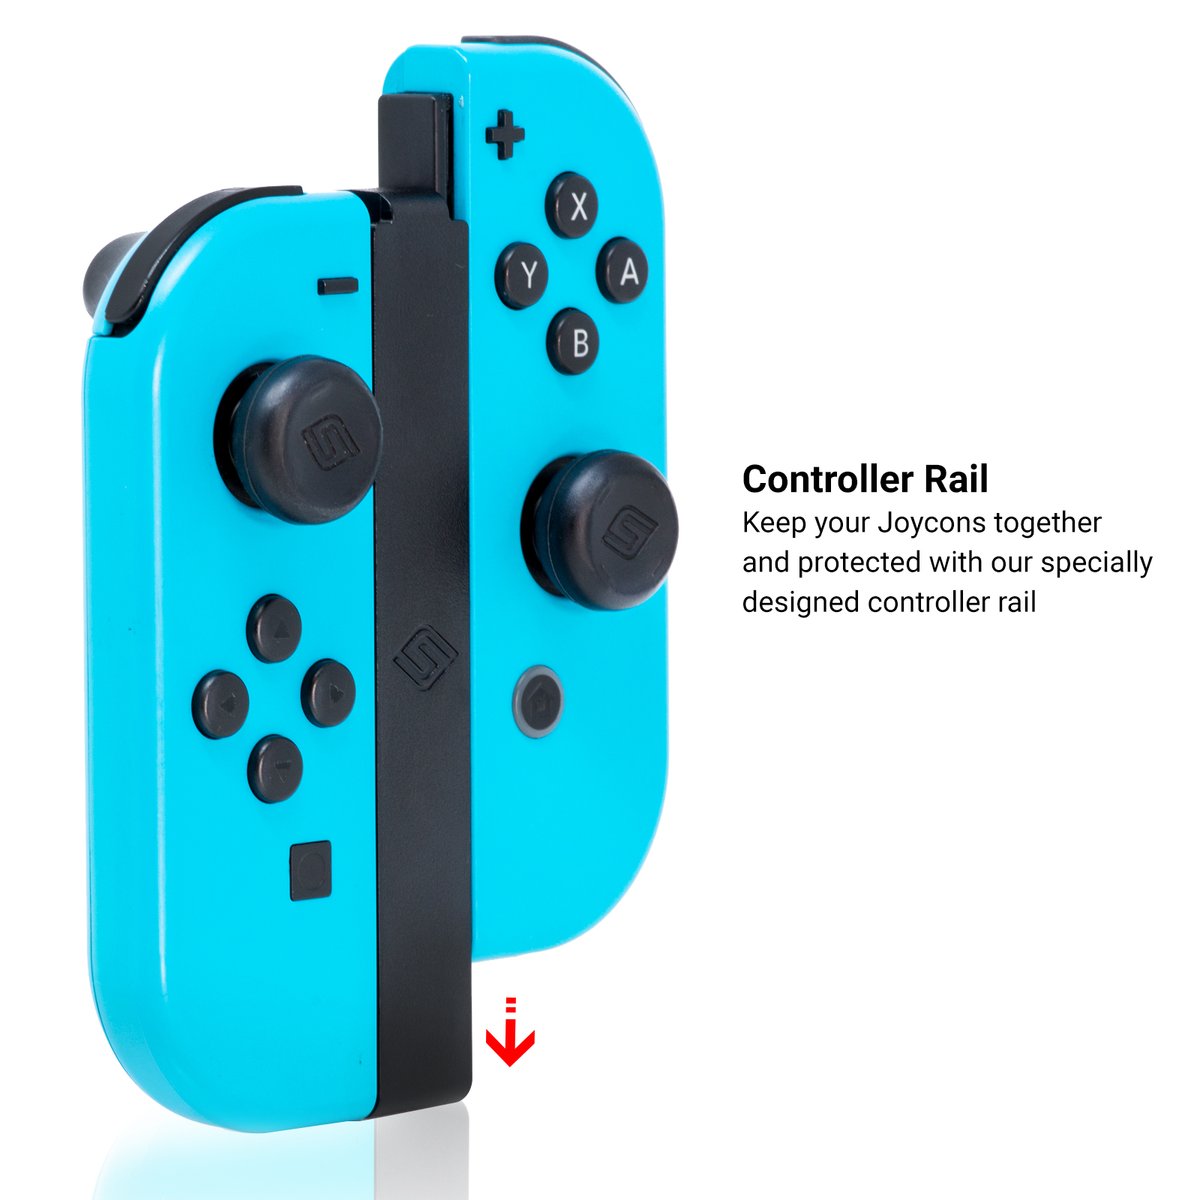 Steam adds support for Nintendo Switch Joy-Cons